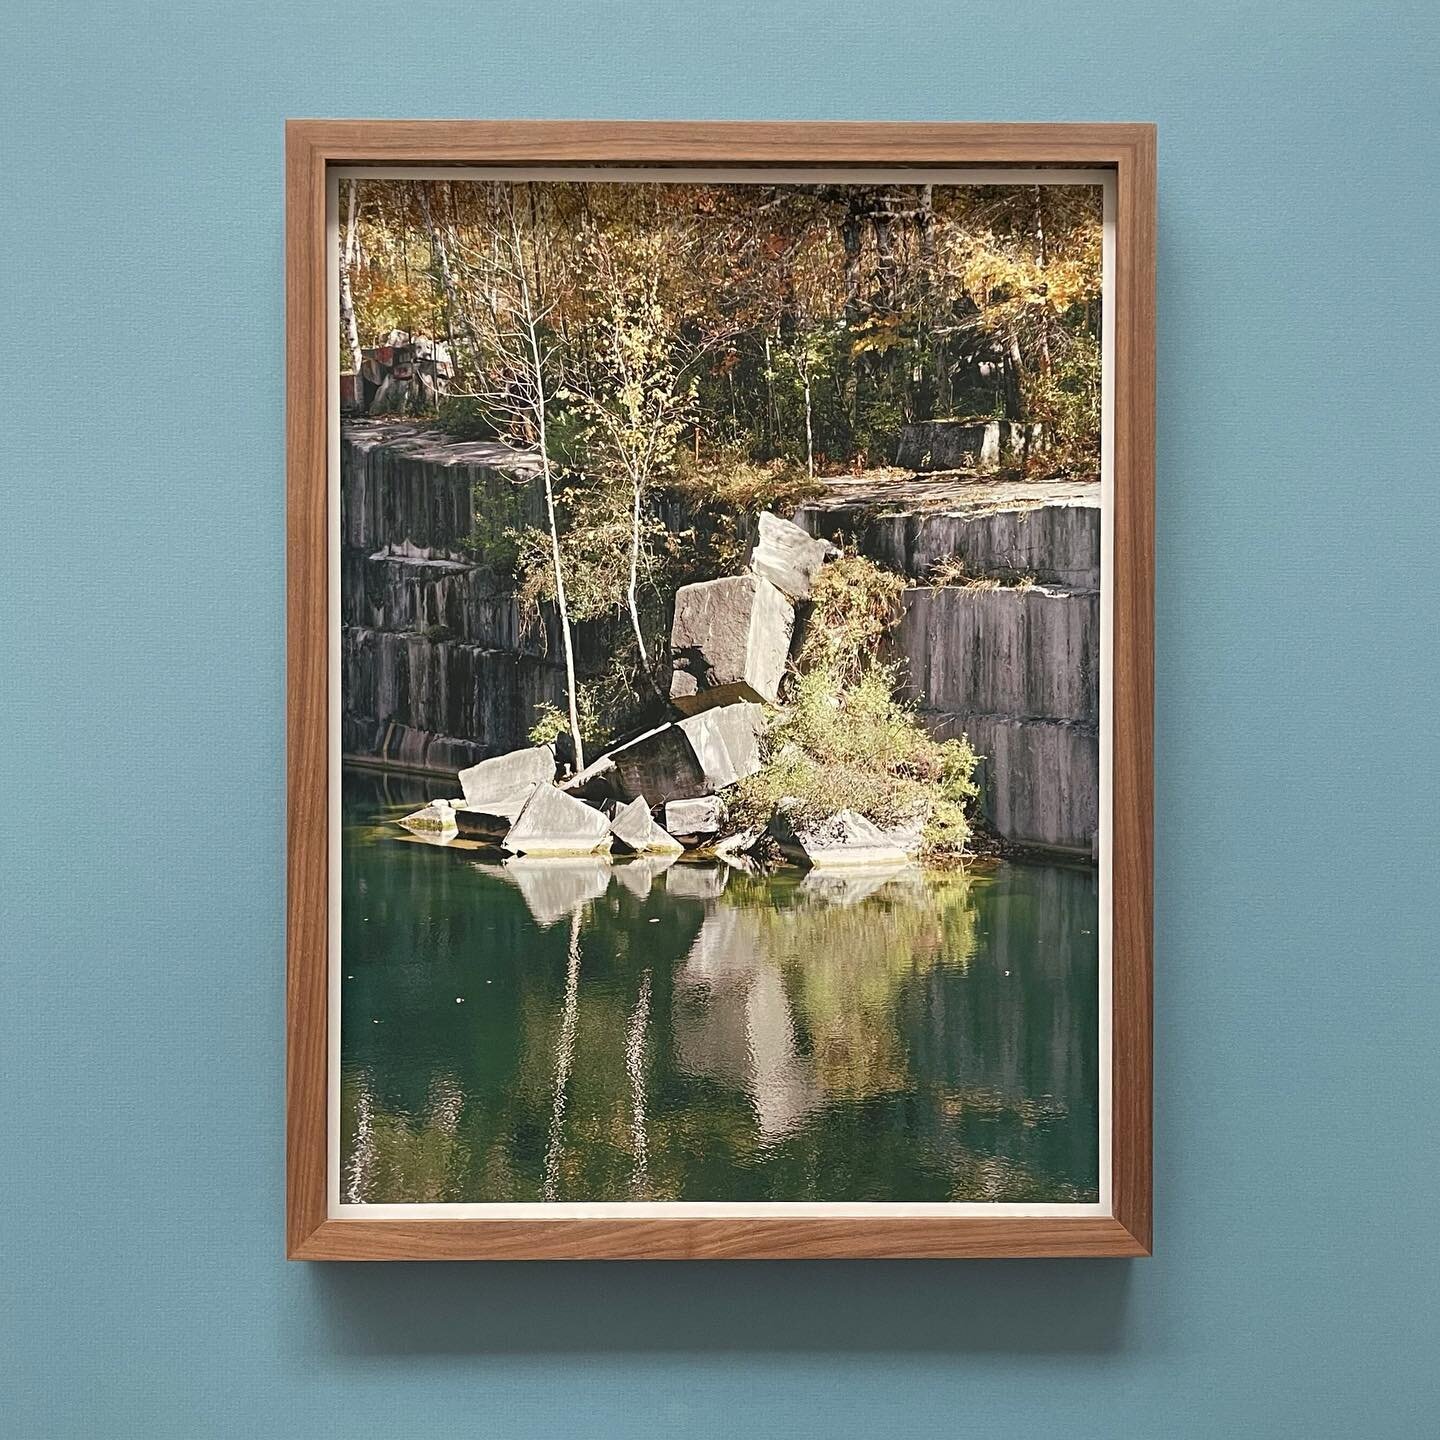 Quarry photograph by @oliverlott 🍂🏞
In waxed walnut frame, with maple splines and realtree camo fillets 🌲